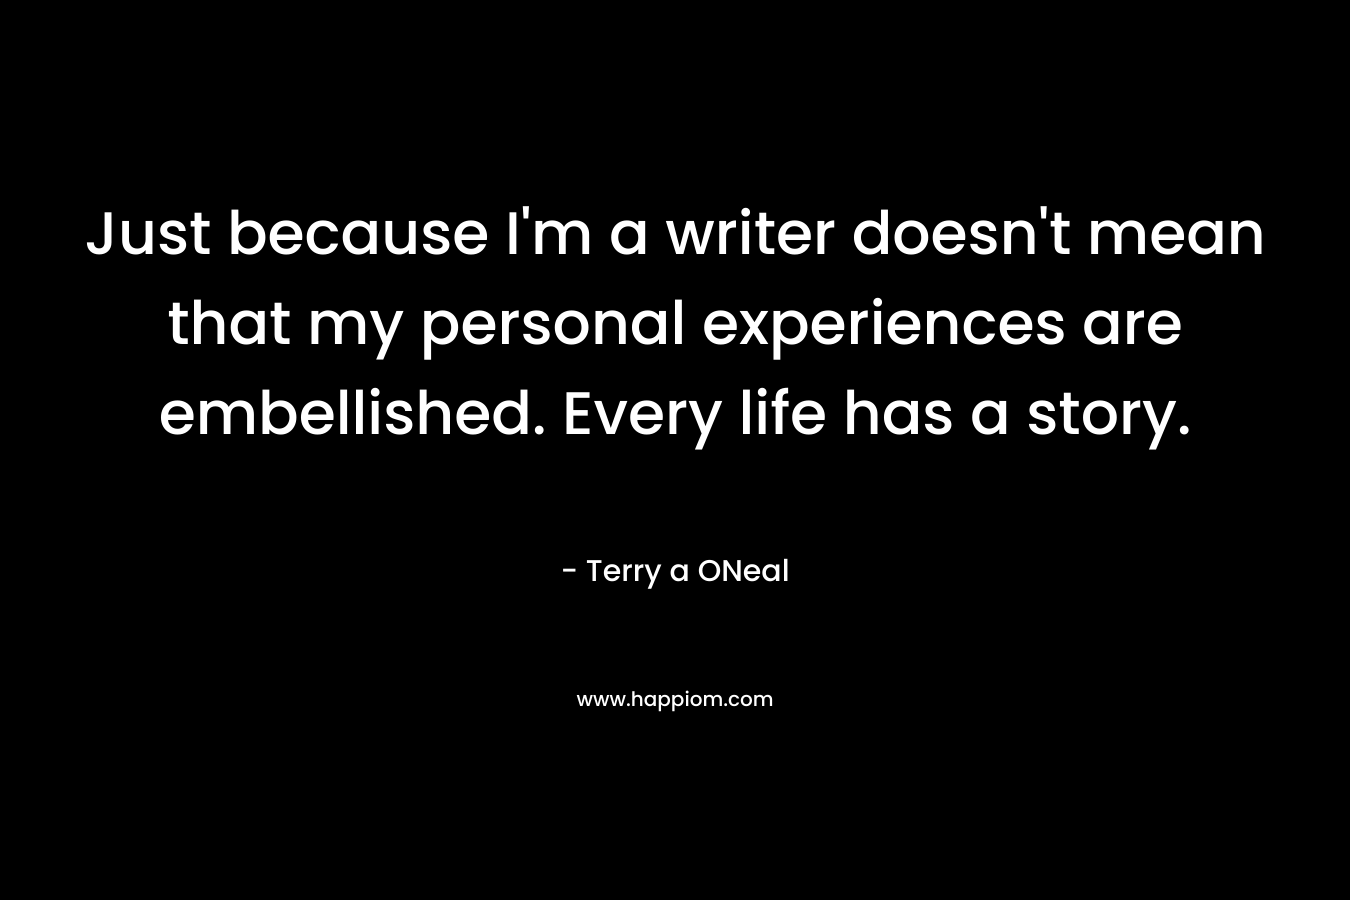 Just because I’m a writer doesn’t mean that my personal experiences are embellished. Every life has a story. – Terry a ONeal